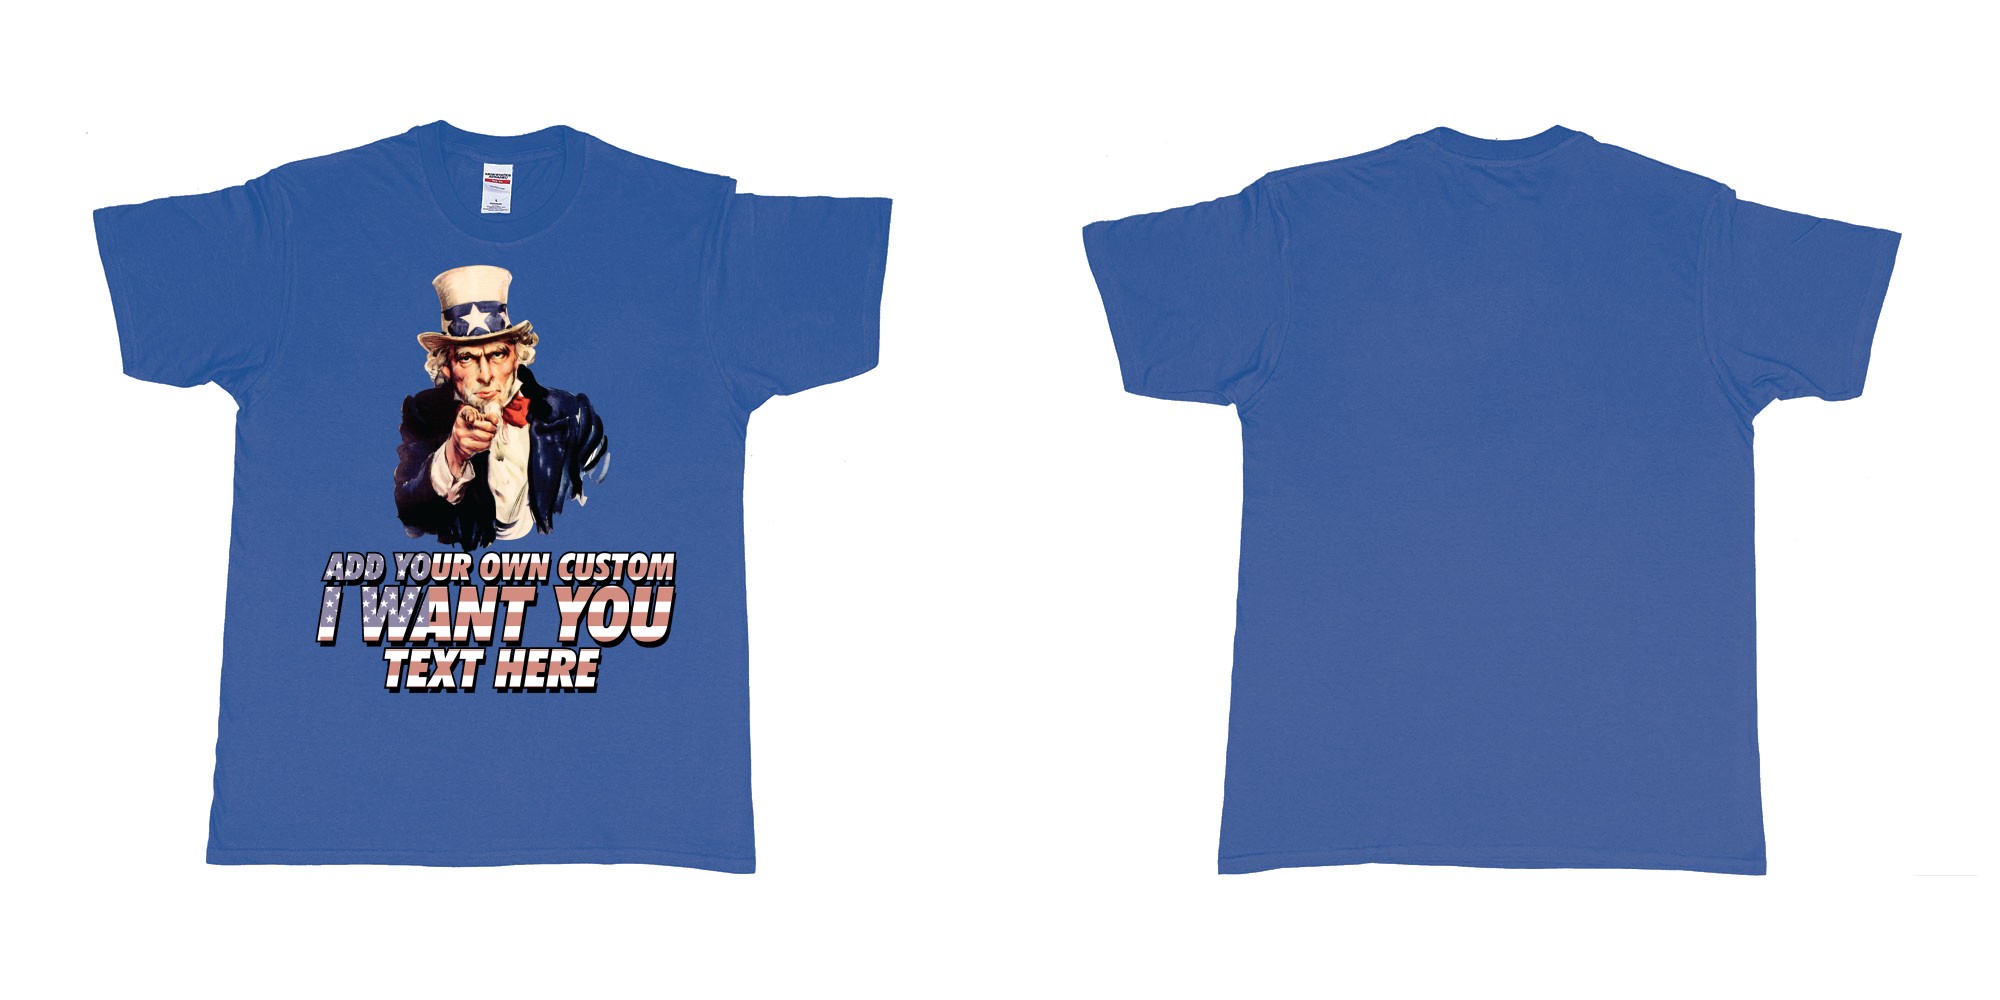 Custom tshirt design uncle sam i want you custom design own printing in fabric color royal-blue choice your own text made in Bali by The Pirate Way